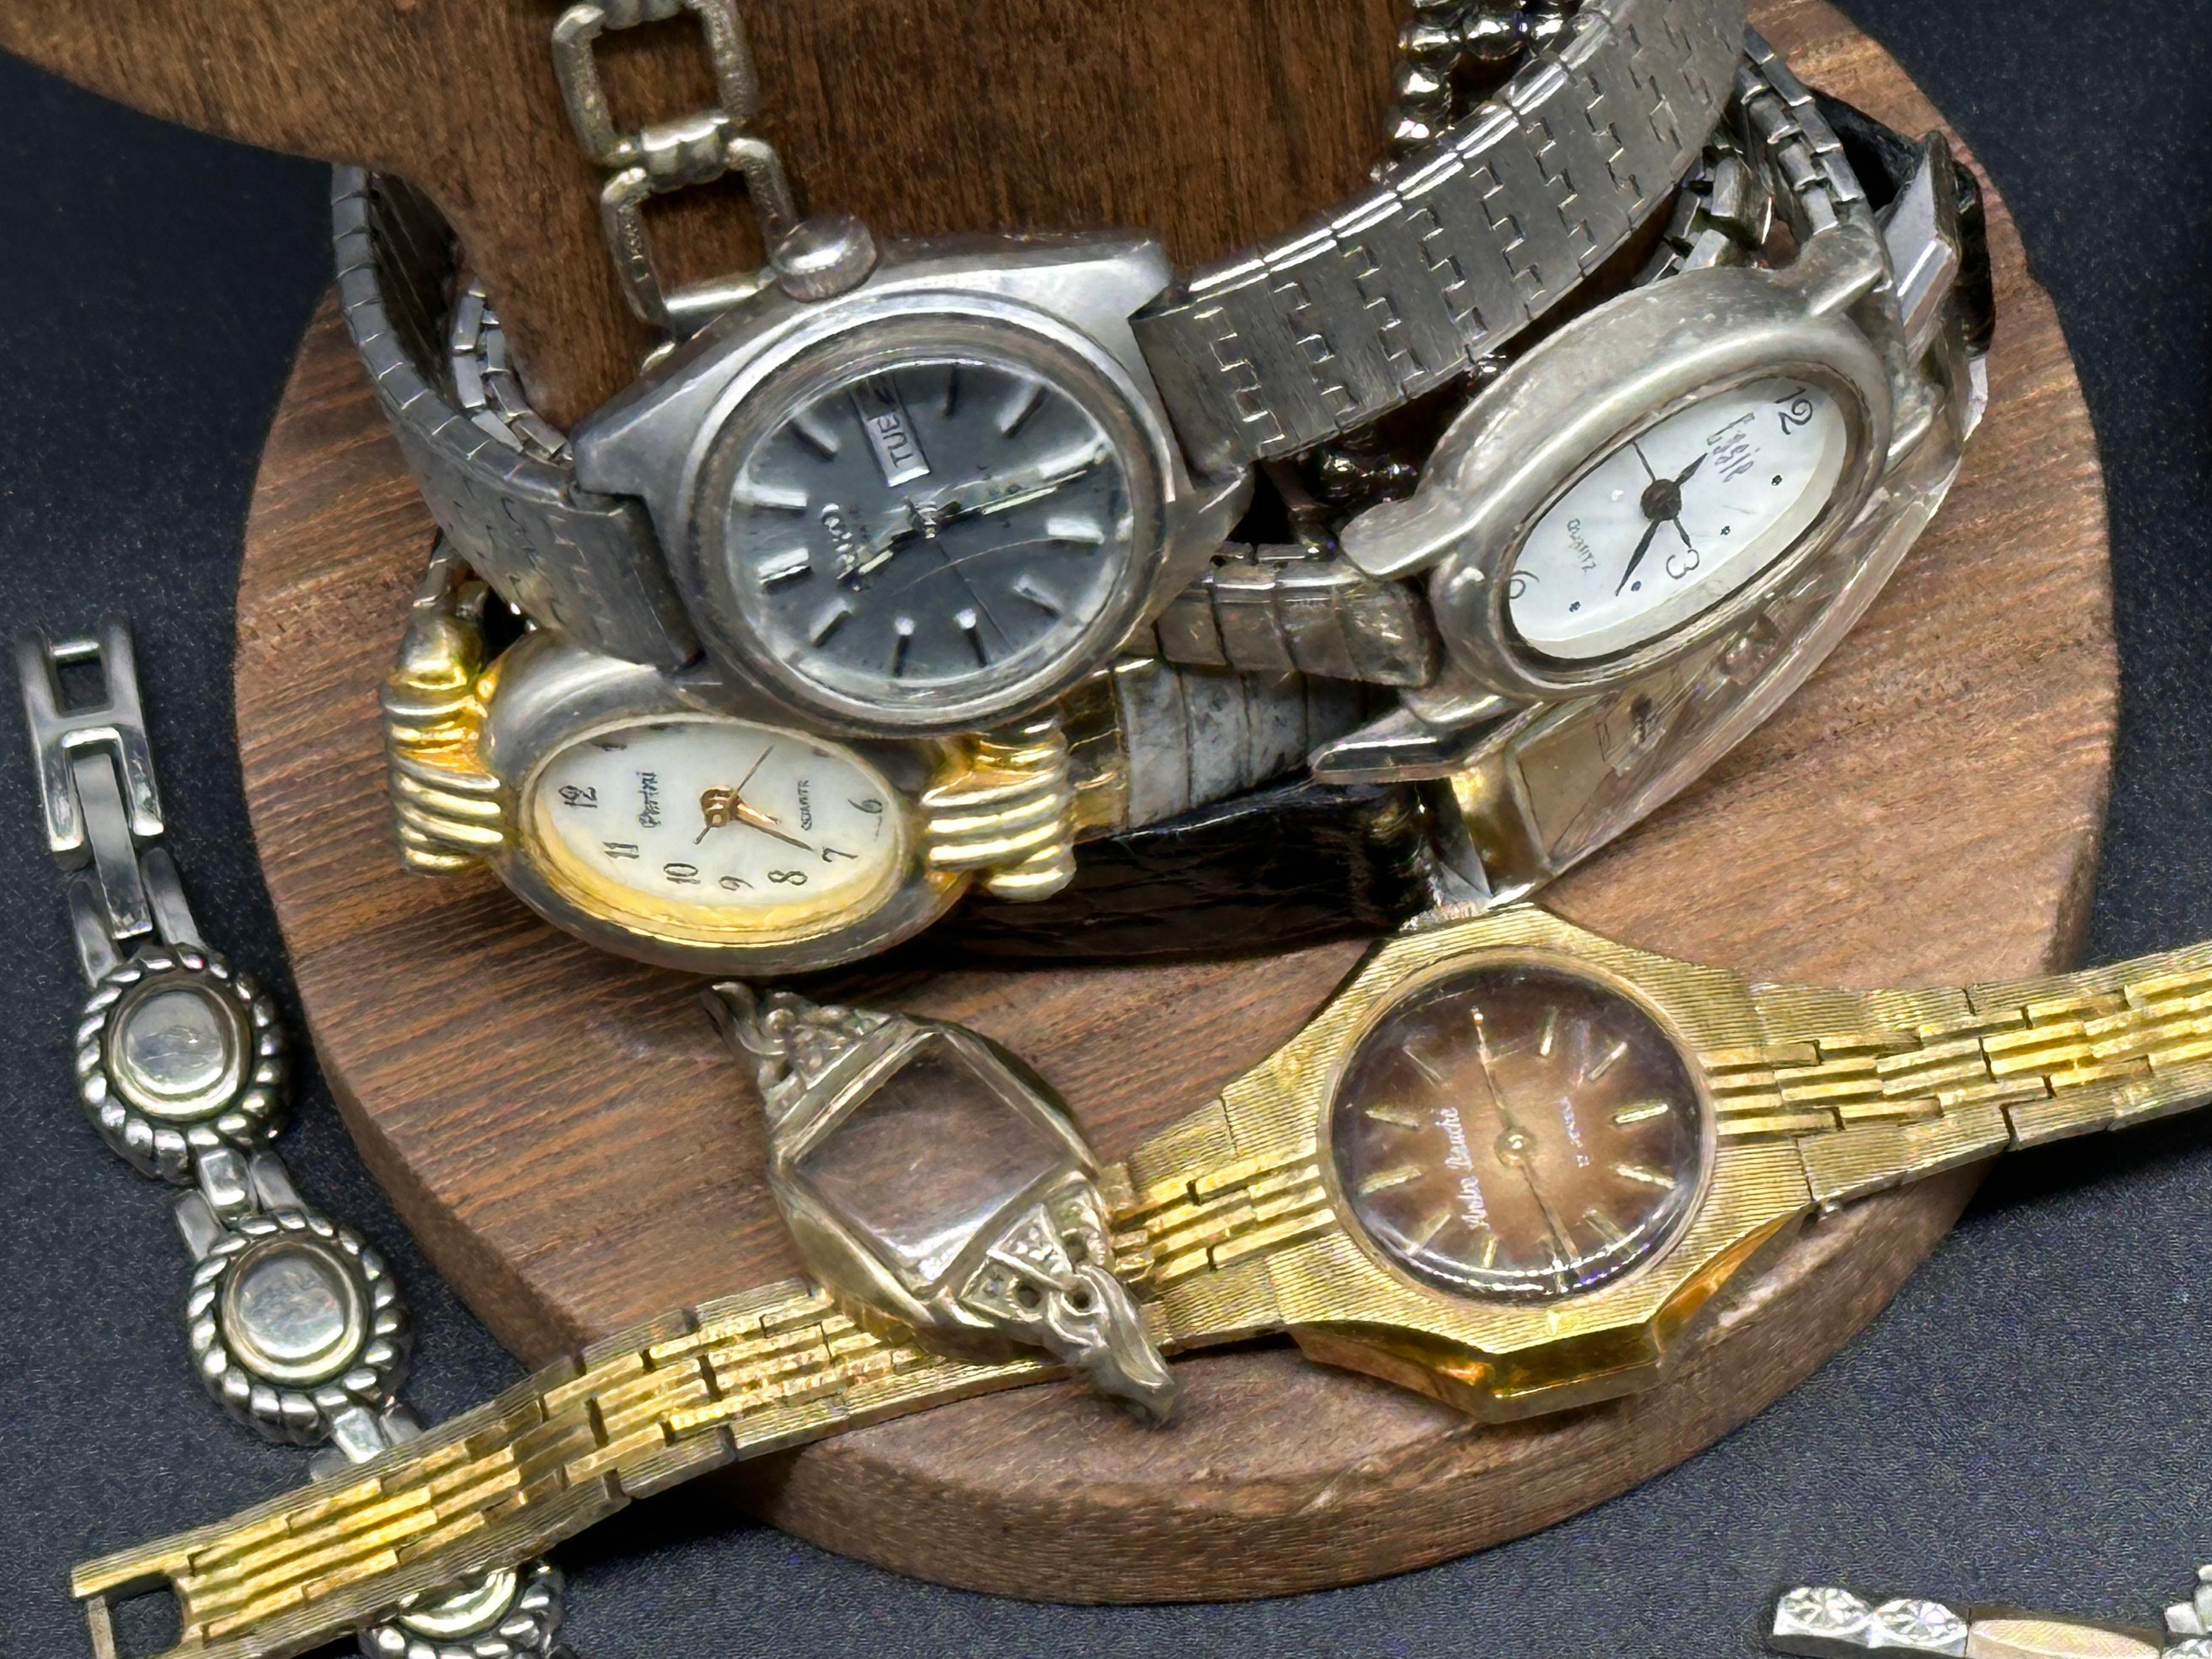 Assortment of Vintage/Antique Ladies Wrist Watches and Watch Parts